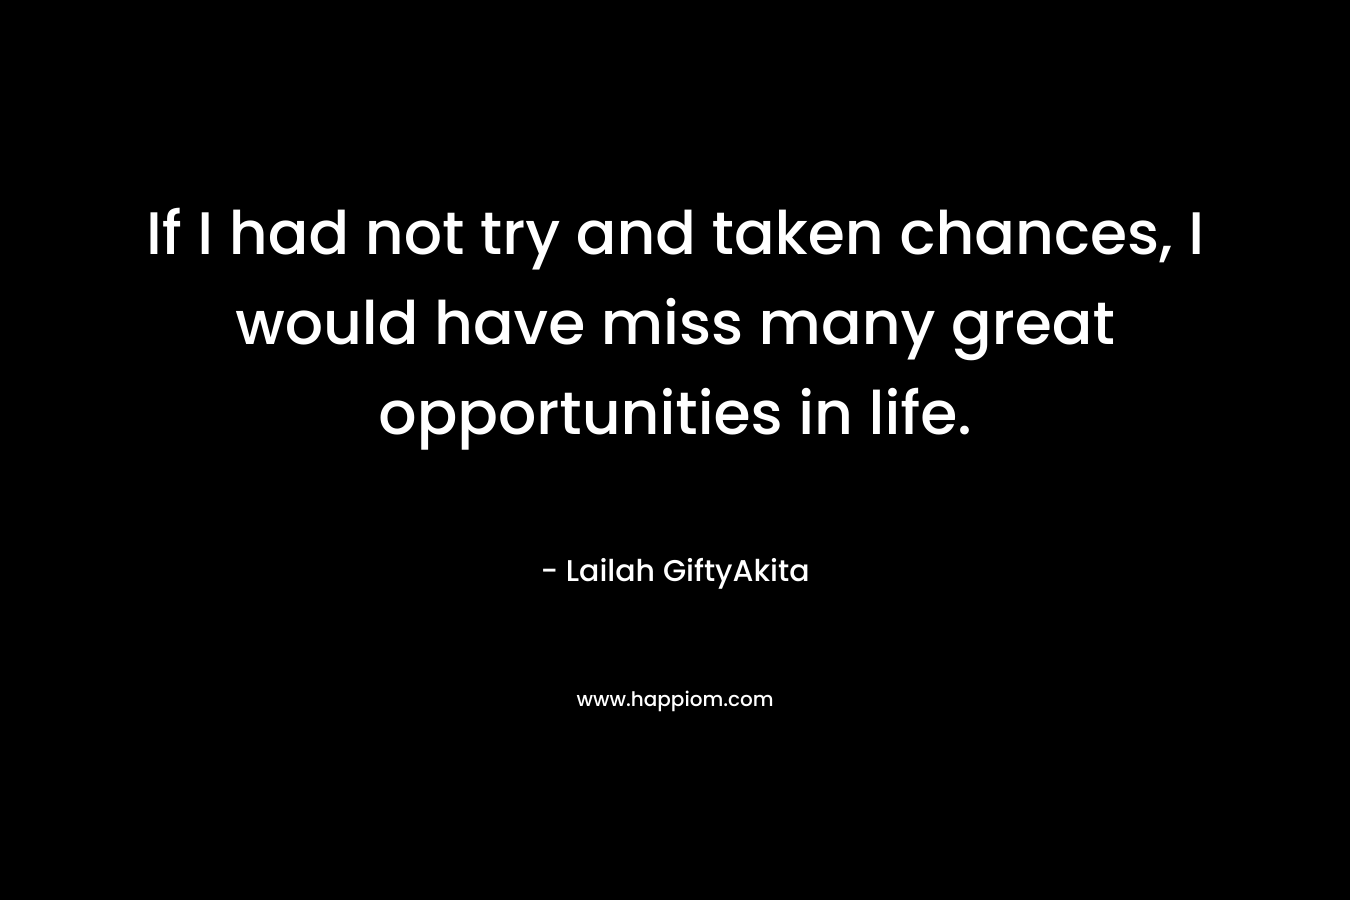 If I had not try and taken chances, I would have miss many great opportunities in life.